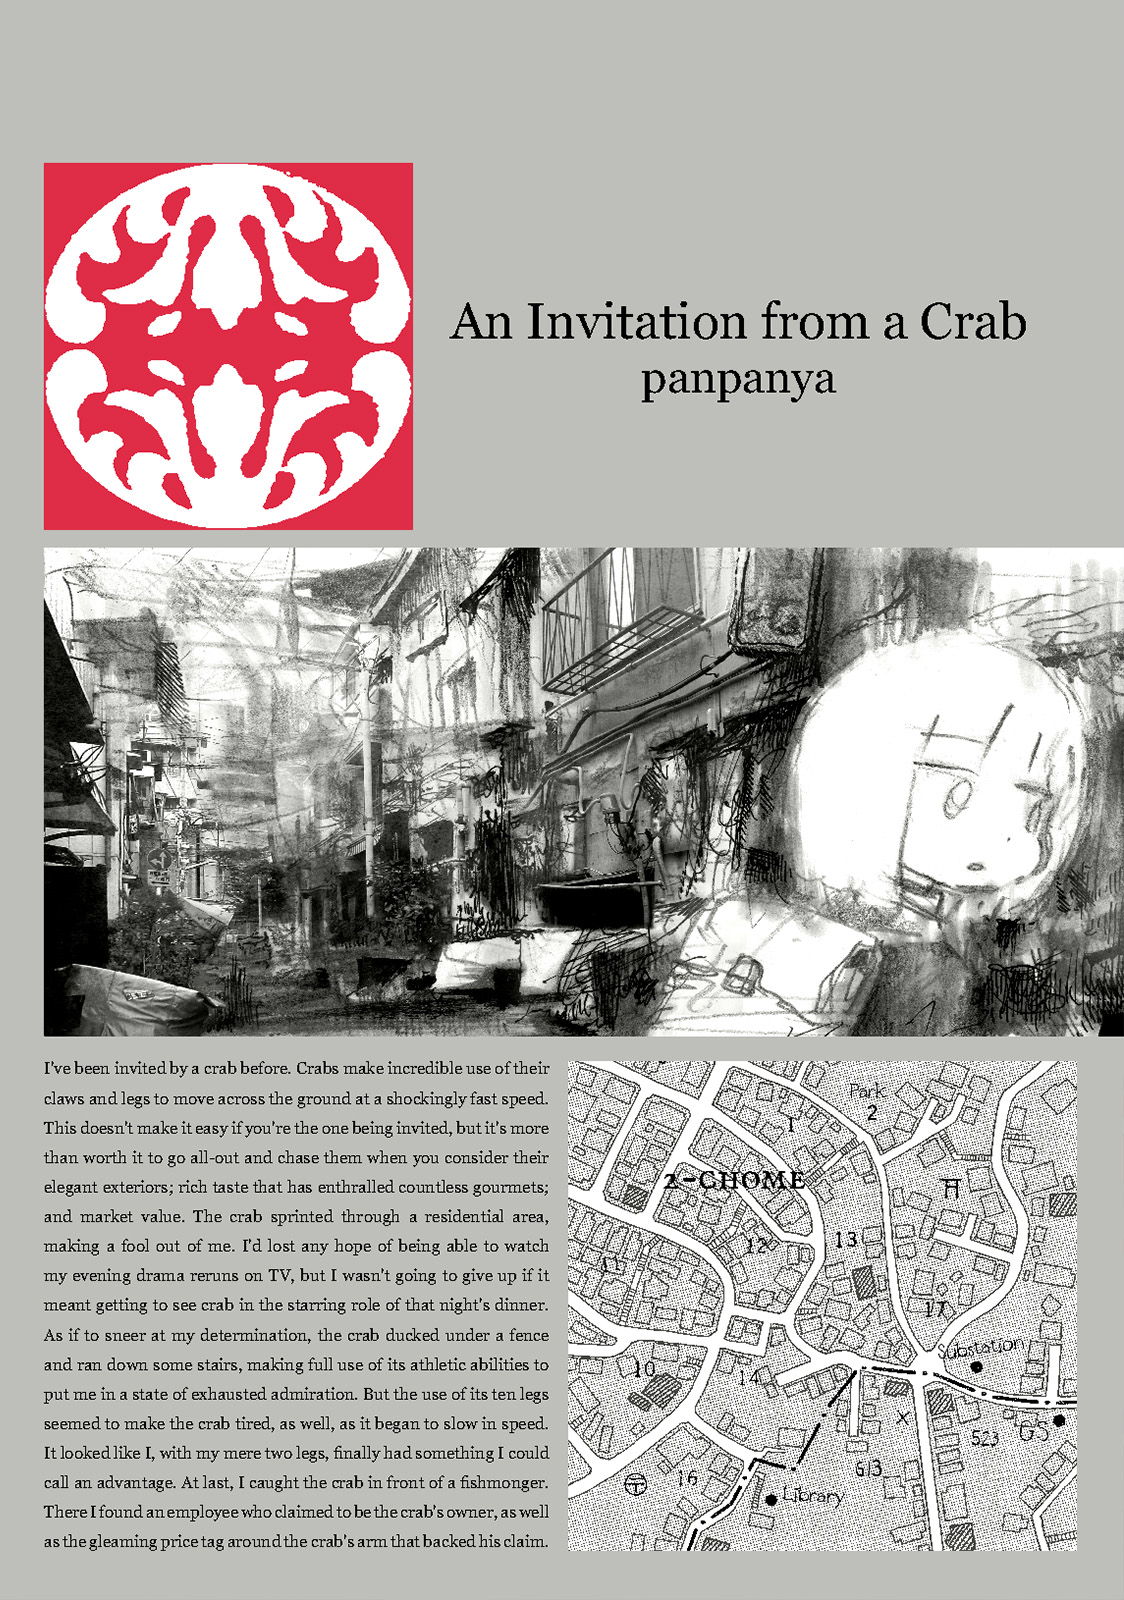 Review: An Invitation from a Crab by panpanya